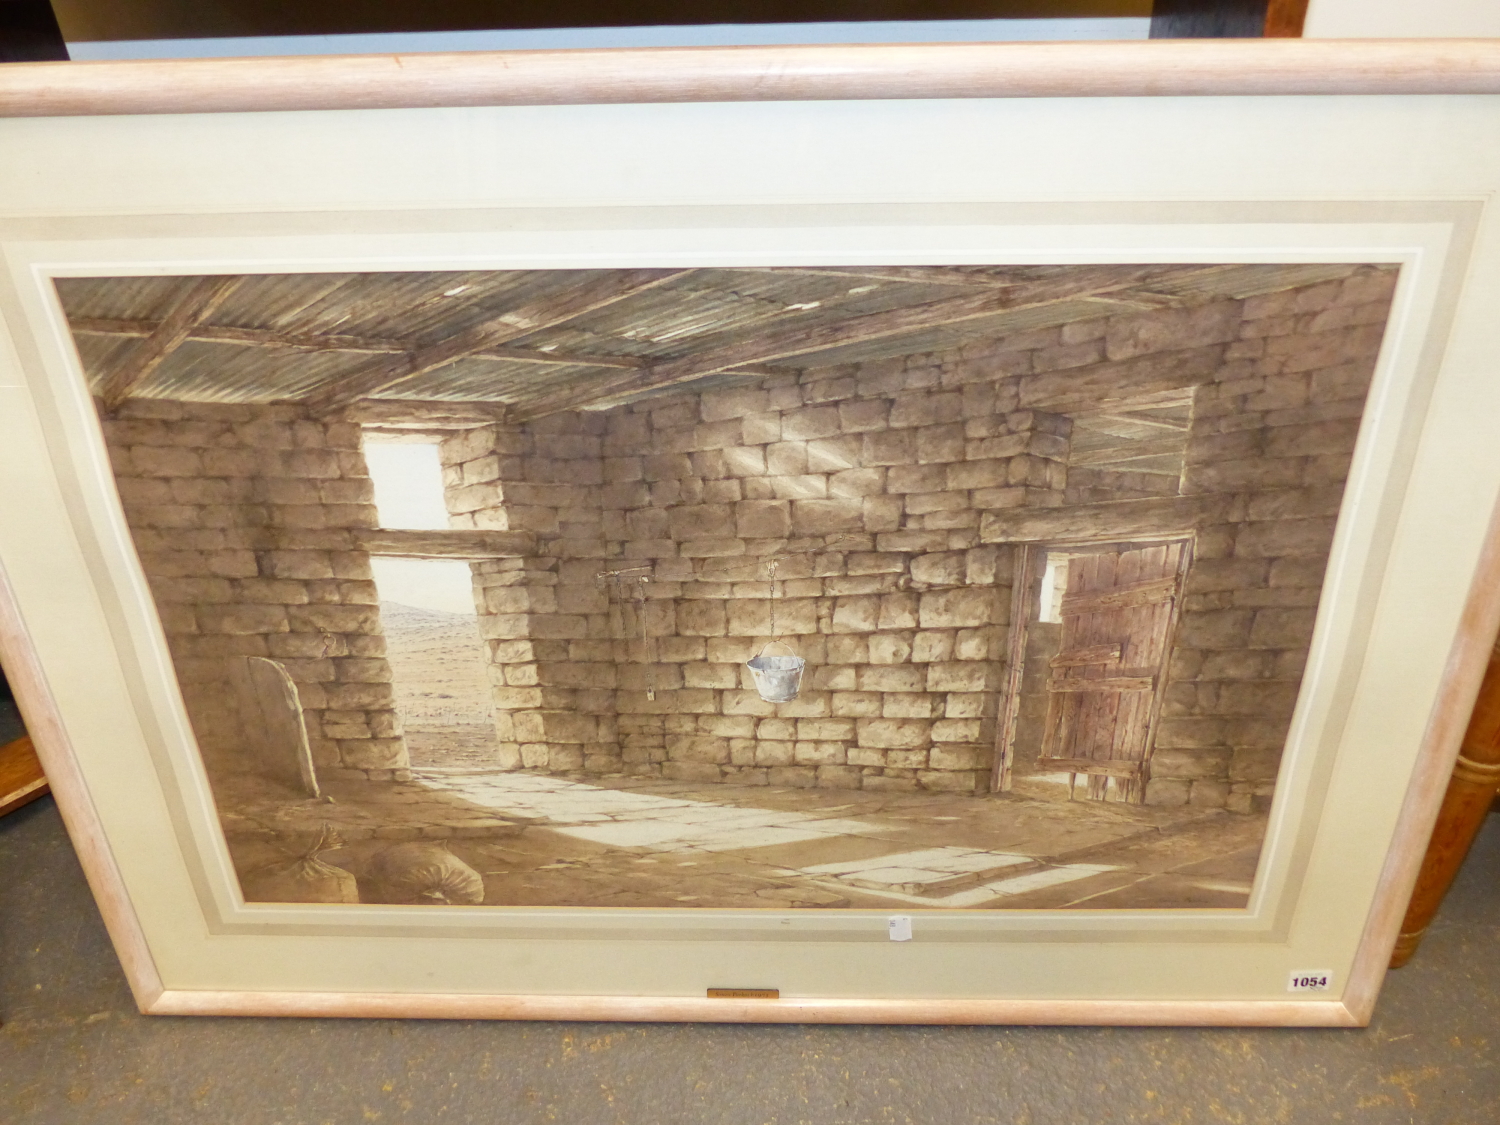 SIMON PARKIN. CONTEMPORARY. ARR. THE STABLE, SIGNED WATERCOLOUR. 49 x 74cms TOGETHER WITH THE OLD - Image 9 of 11